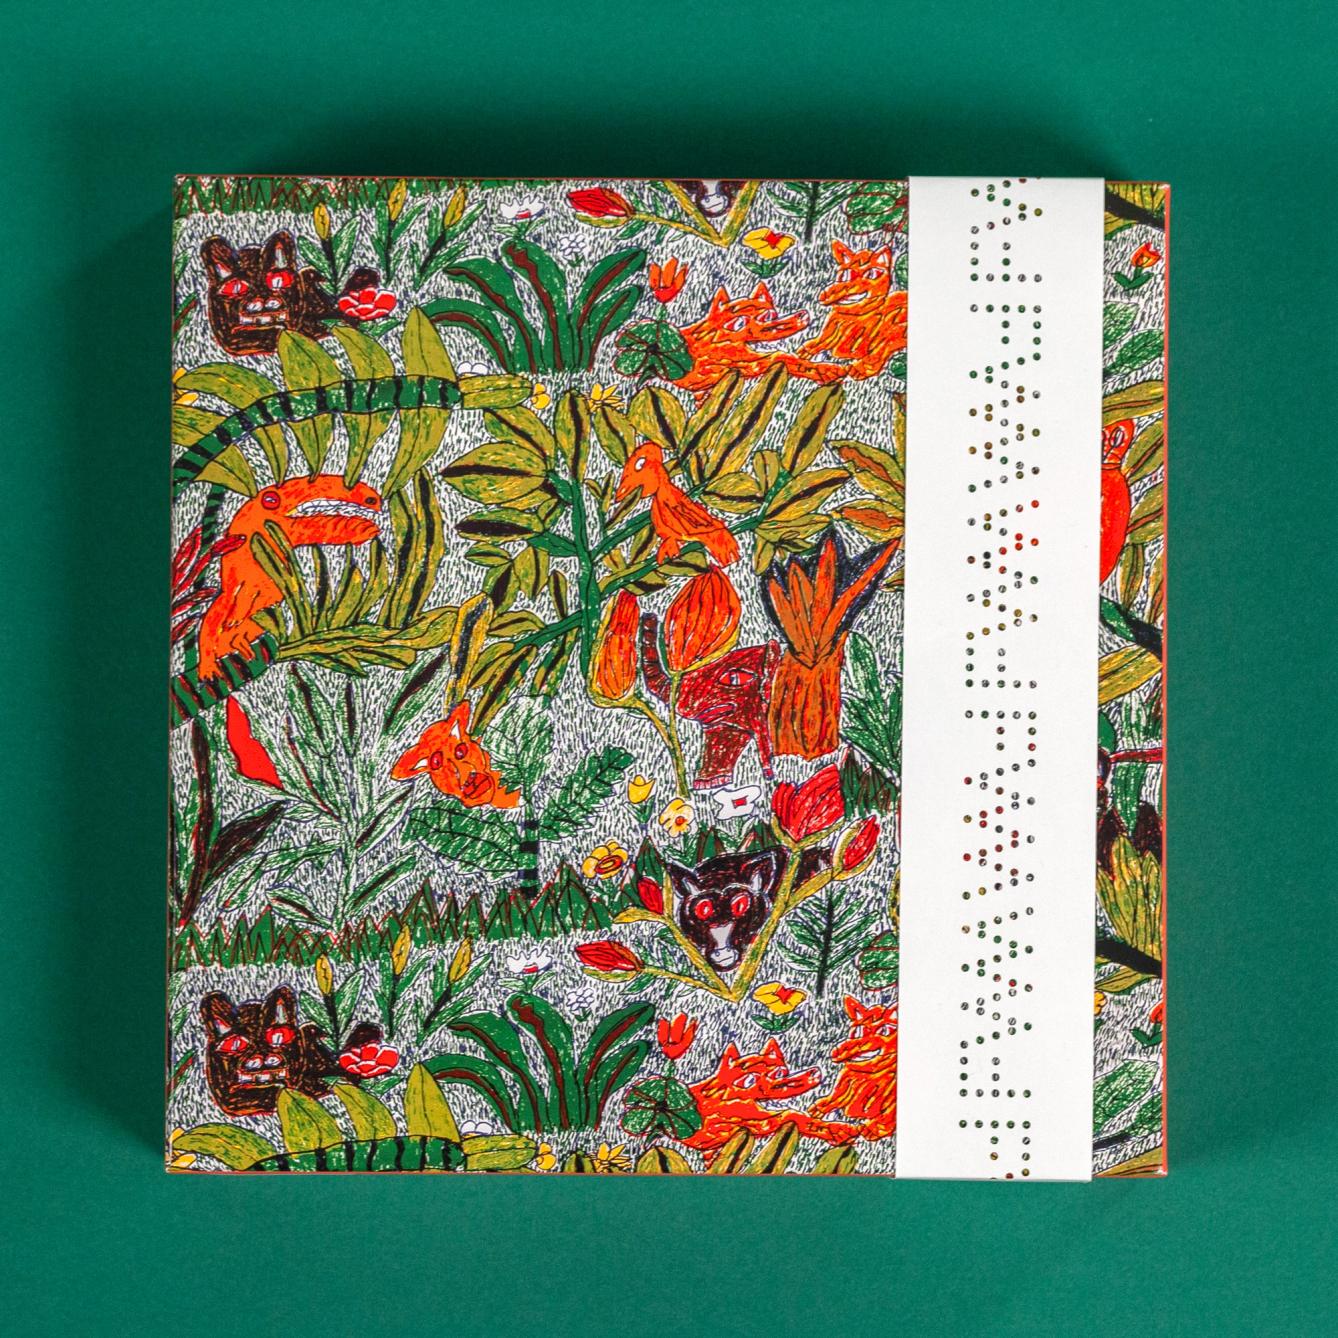 A puzzle box is on top of a dark green background. The puzzle box shows the pattern of the puzzle, which is a hand-drawn repeat design featuring illustrative jungle plants and animals in vibrant oranges and greens. On the right is a white paper band of packaging with the FWM logo cut out in a repeating strip.